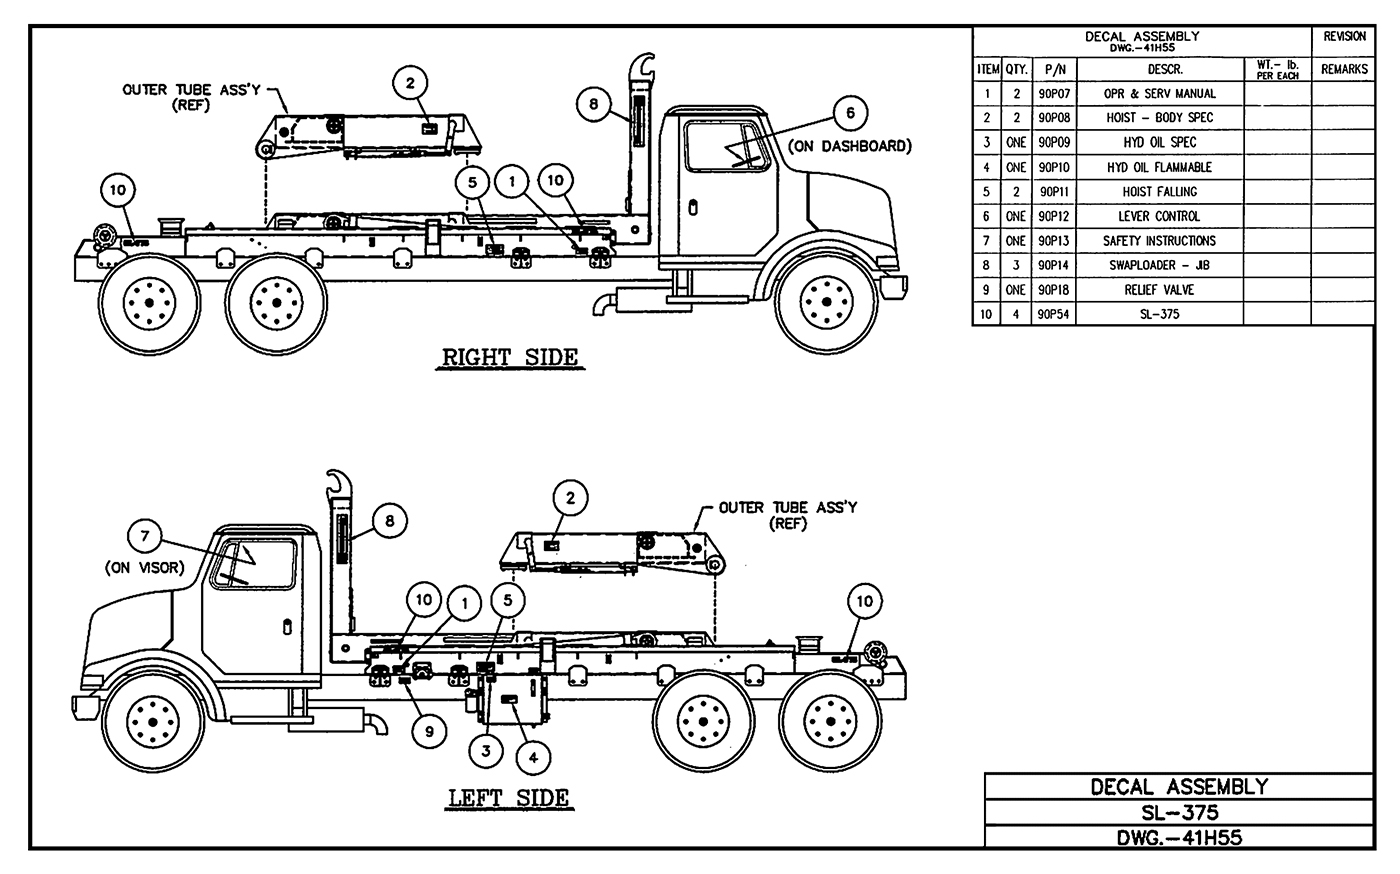 SL-375 Decal Assembly Diagram